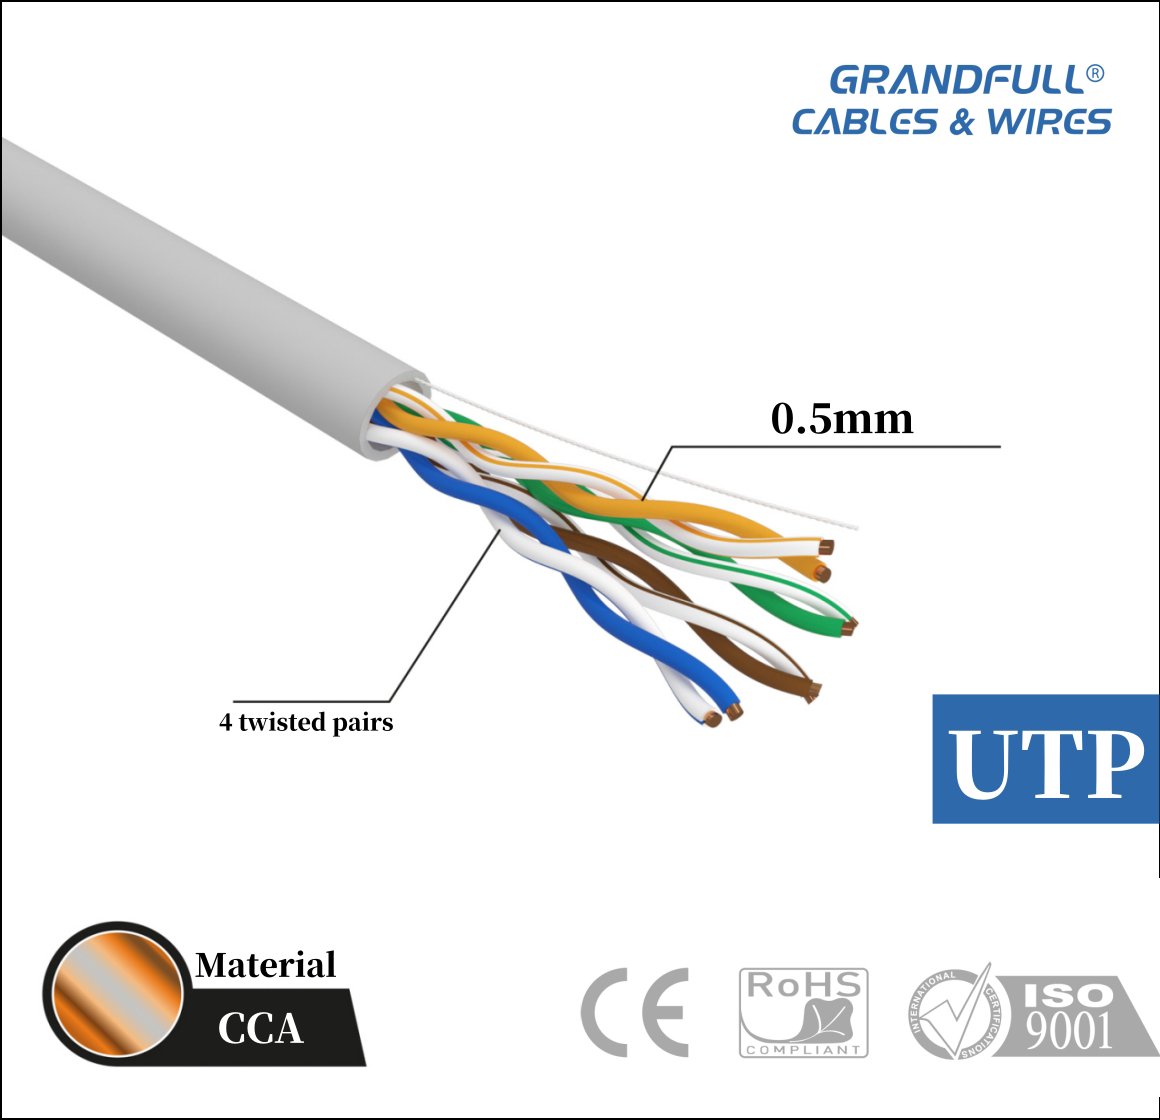 CCA material for conductor. Diameter customize available. Jacket color optional. Web：www.grandfullcable. com Email: manage@forcan.com #cat5 #cat6 #cat6a #cat7 #cable #network #computer #datacenter #cabling #fiberoptic #telecomunicaciones #internet #wifisolutions #networking